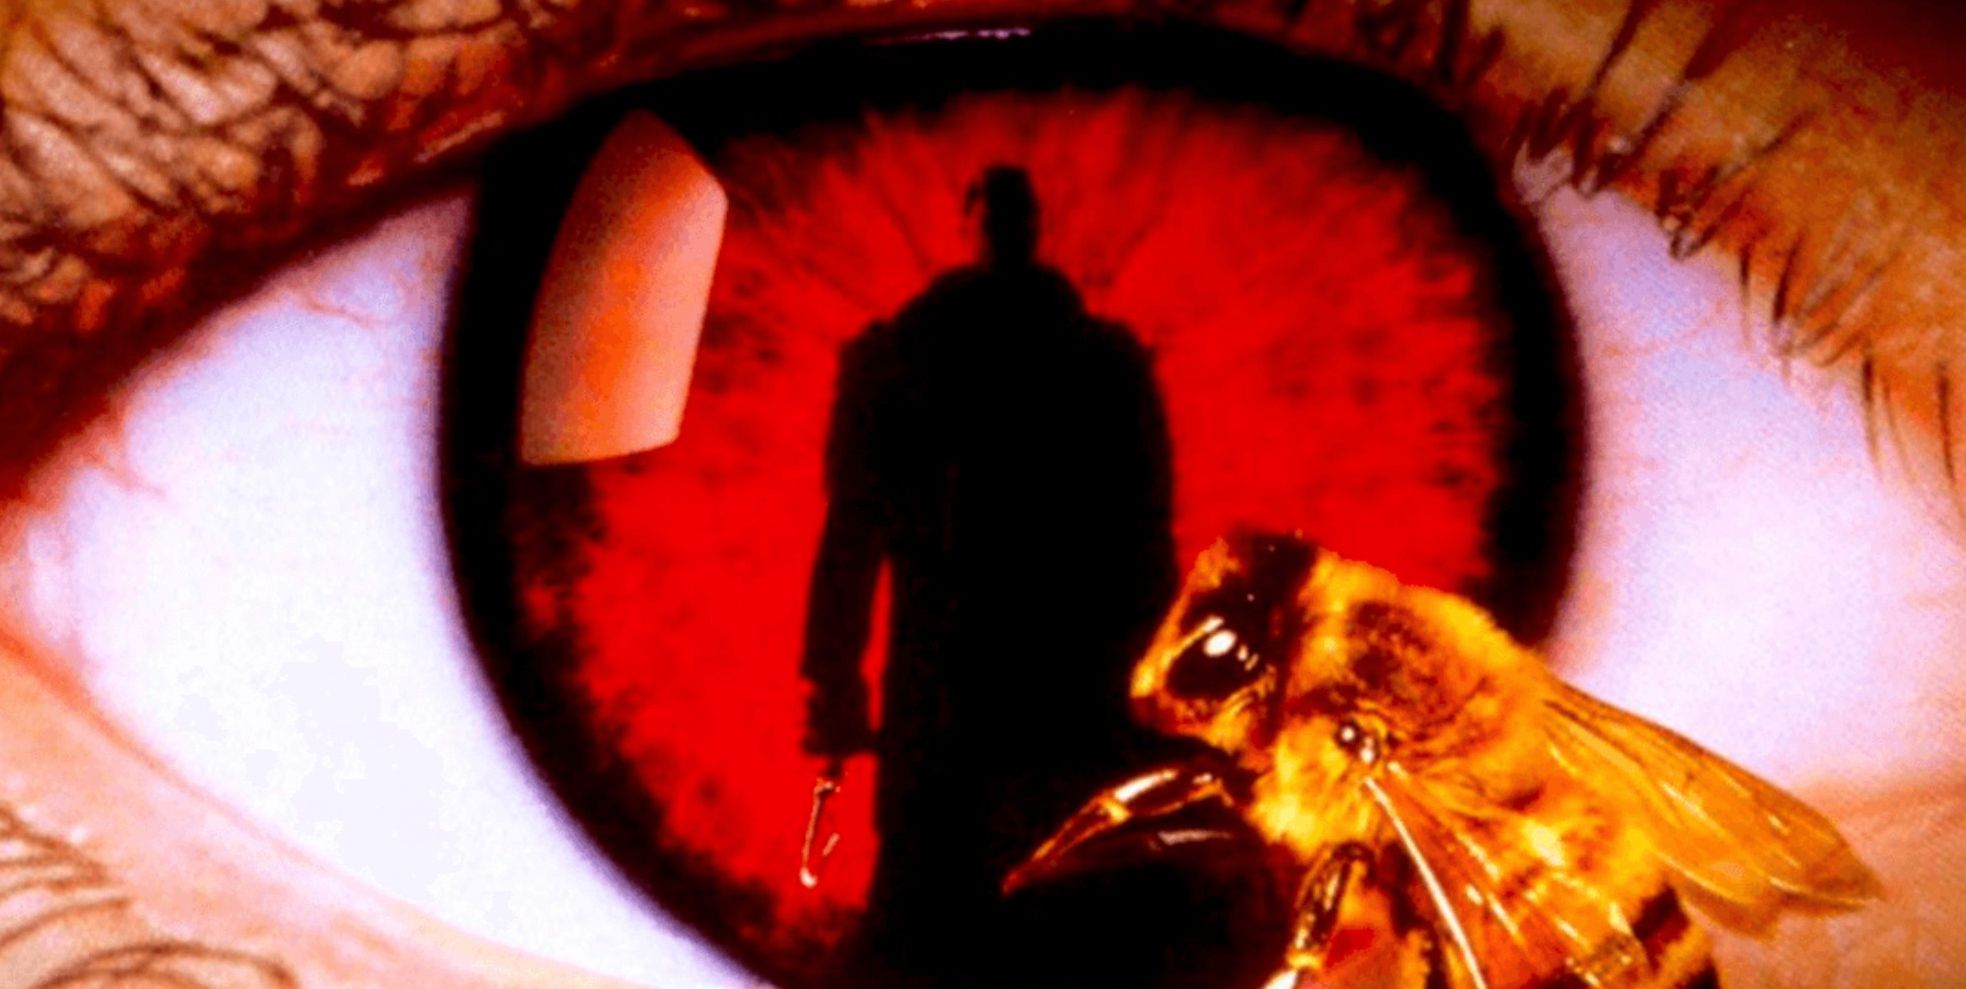 The Candyman reflected in a red eye with a bee.